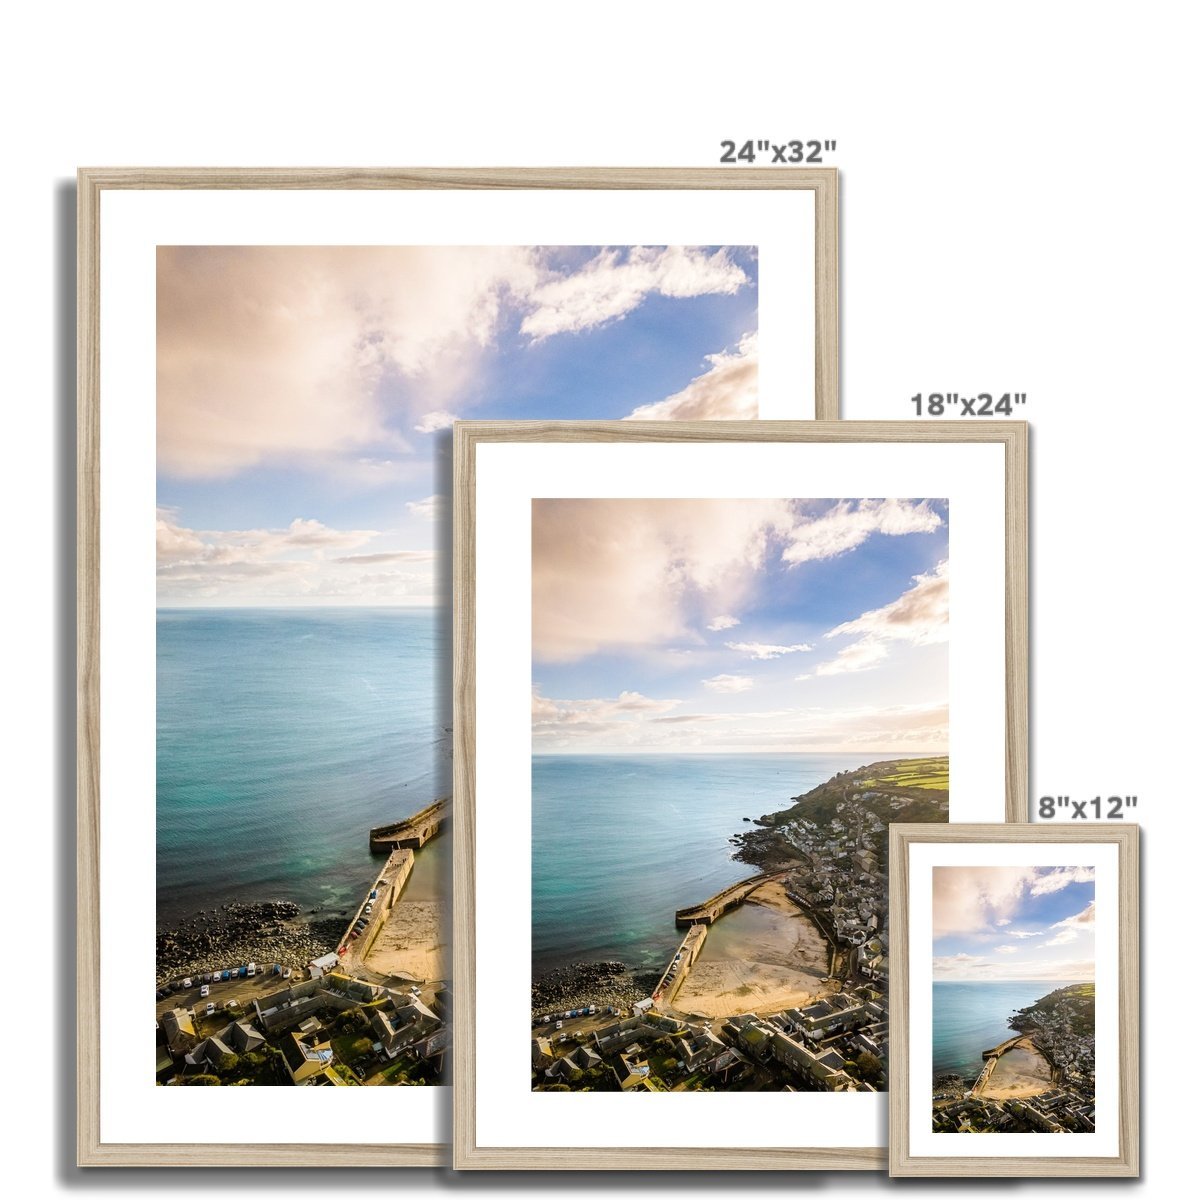 mousehole wooden frame sizes